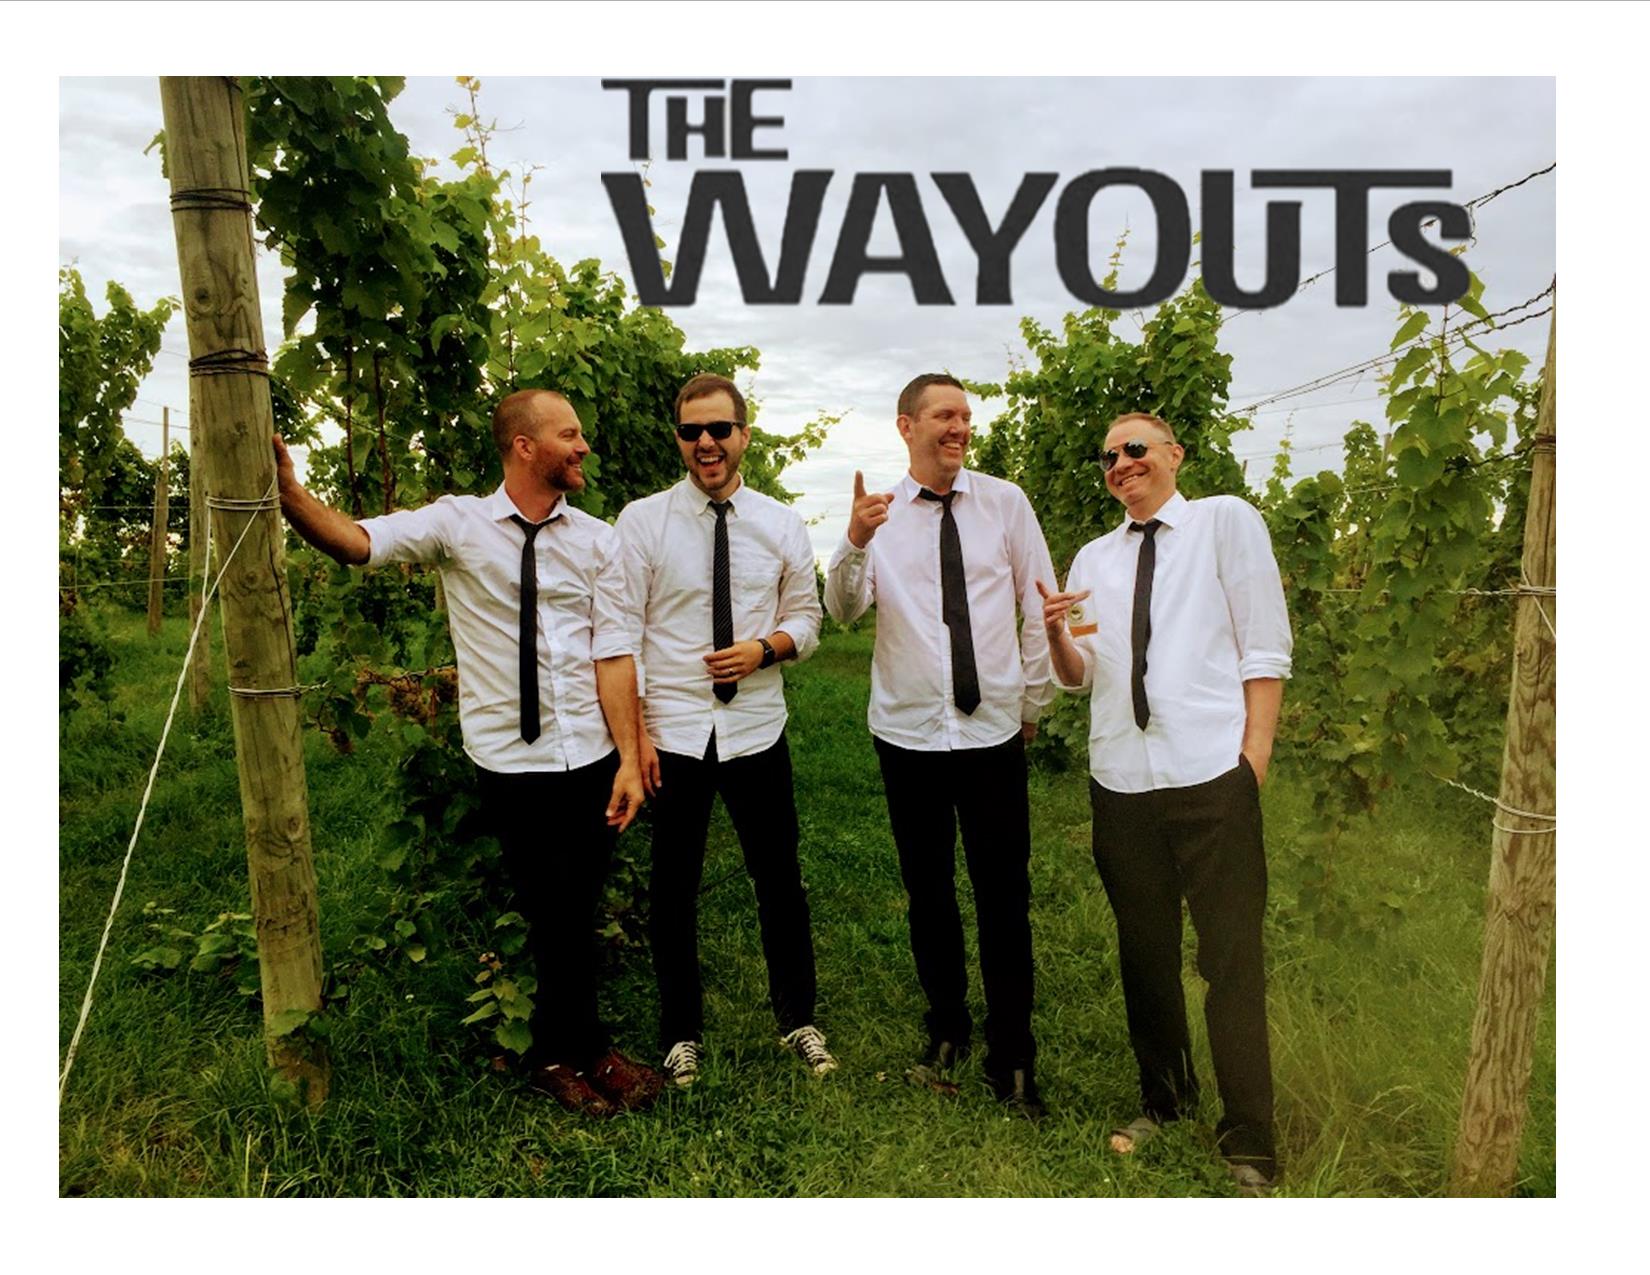 Members of The Wayouts wearing plain white button-down shirts with black ties.